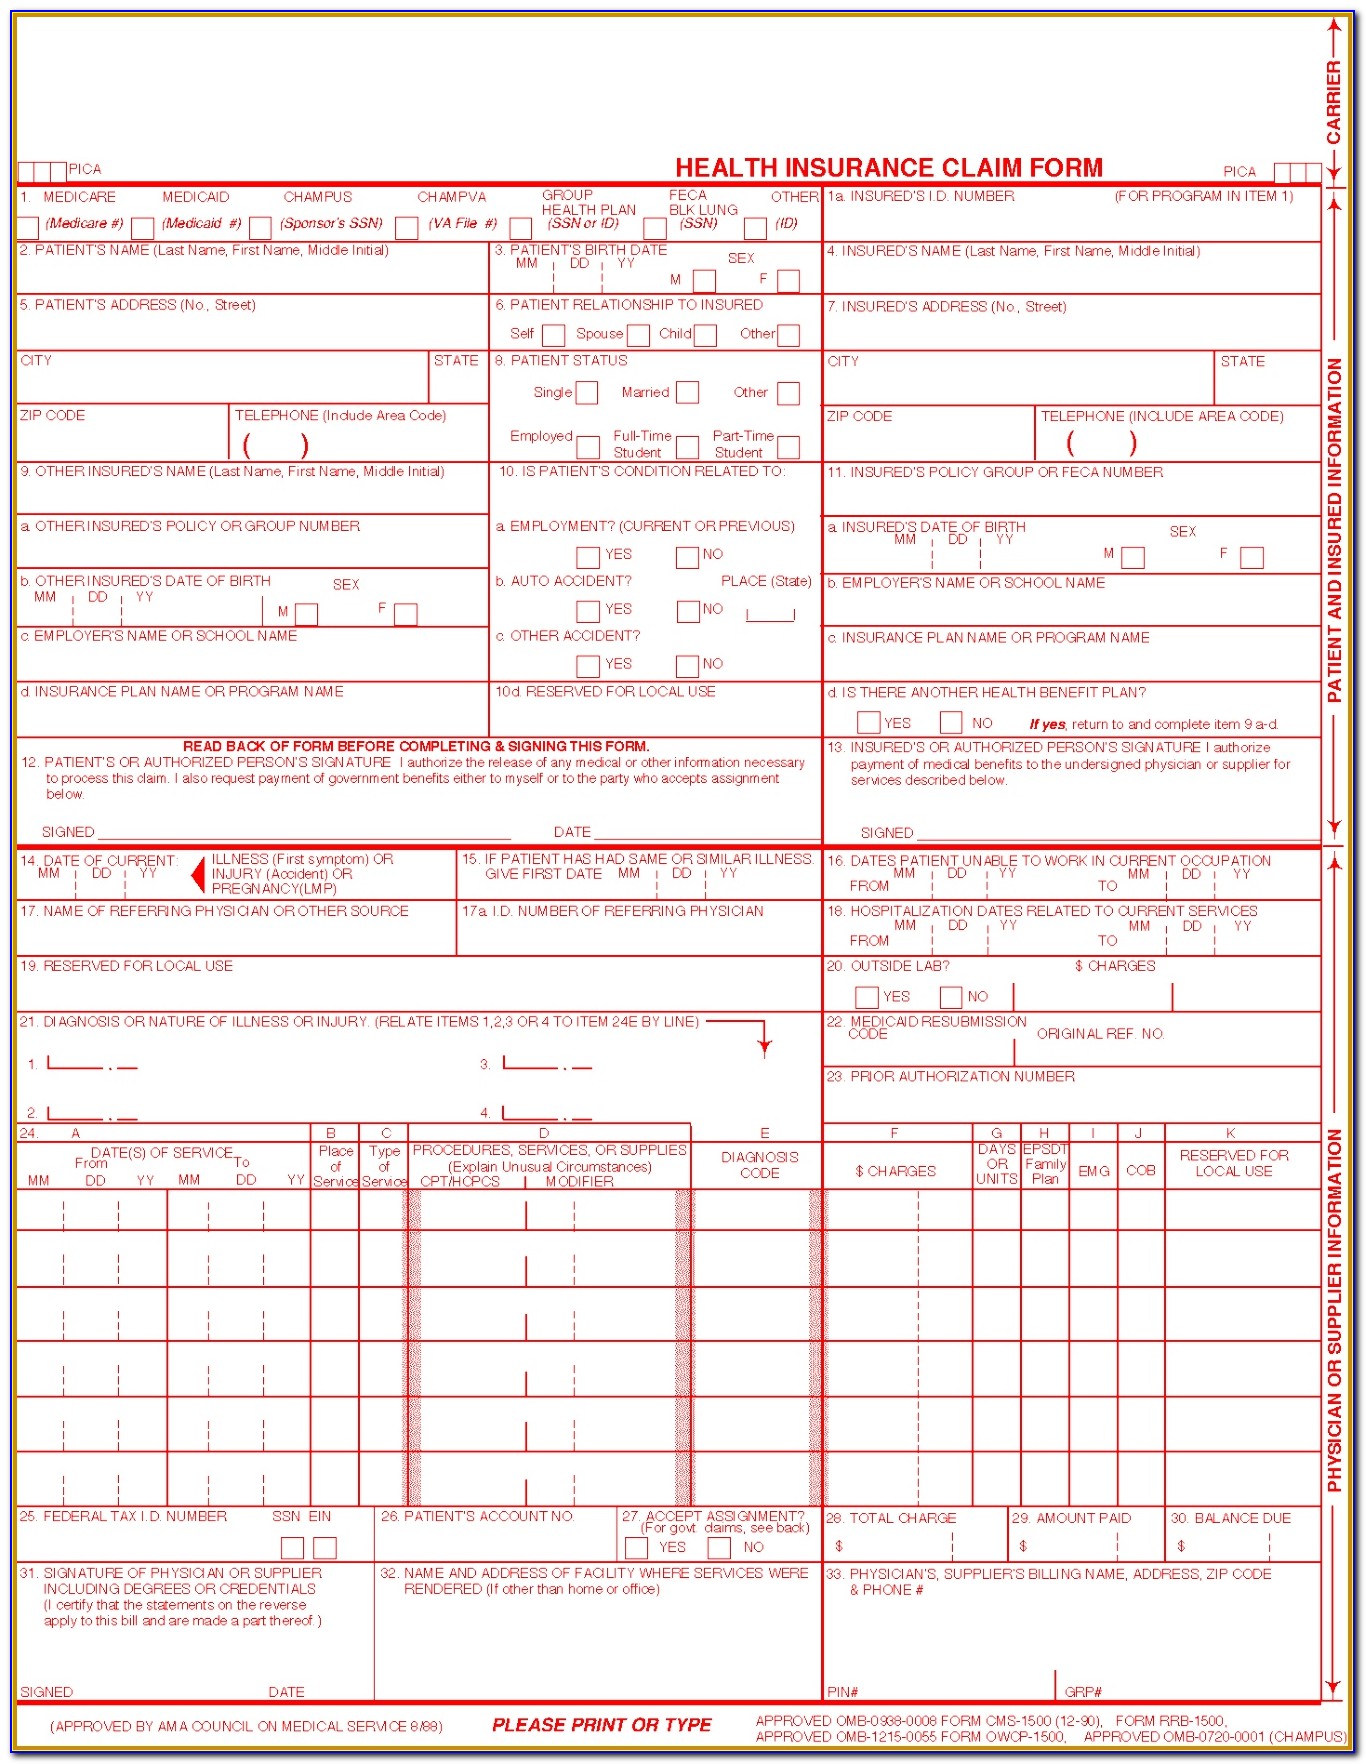 Universal Claim Form Template 91817 Hcfa 1500 ? Medical Billing Wiki ? Claims Med